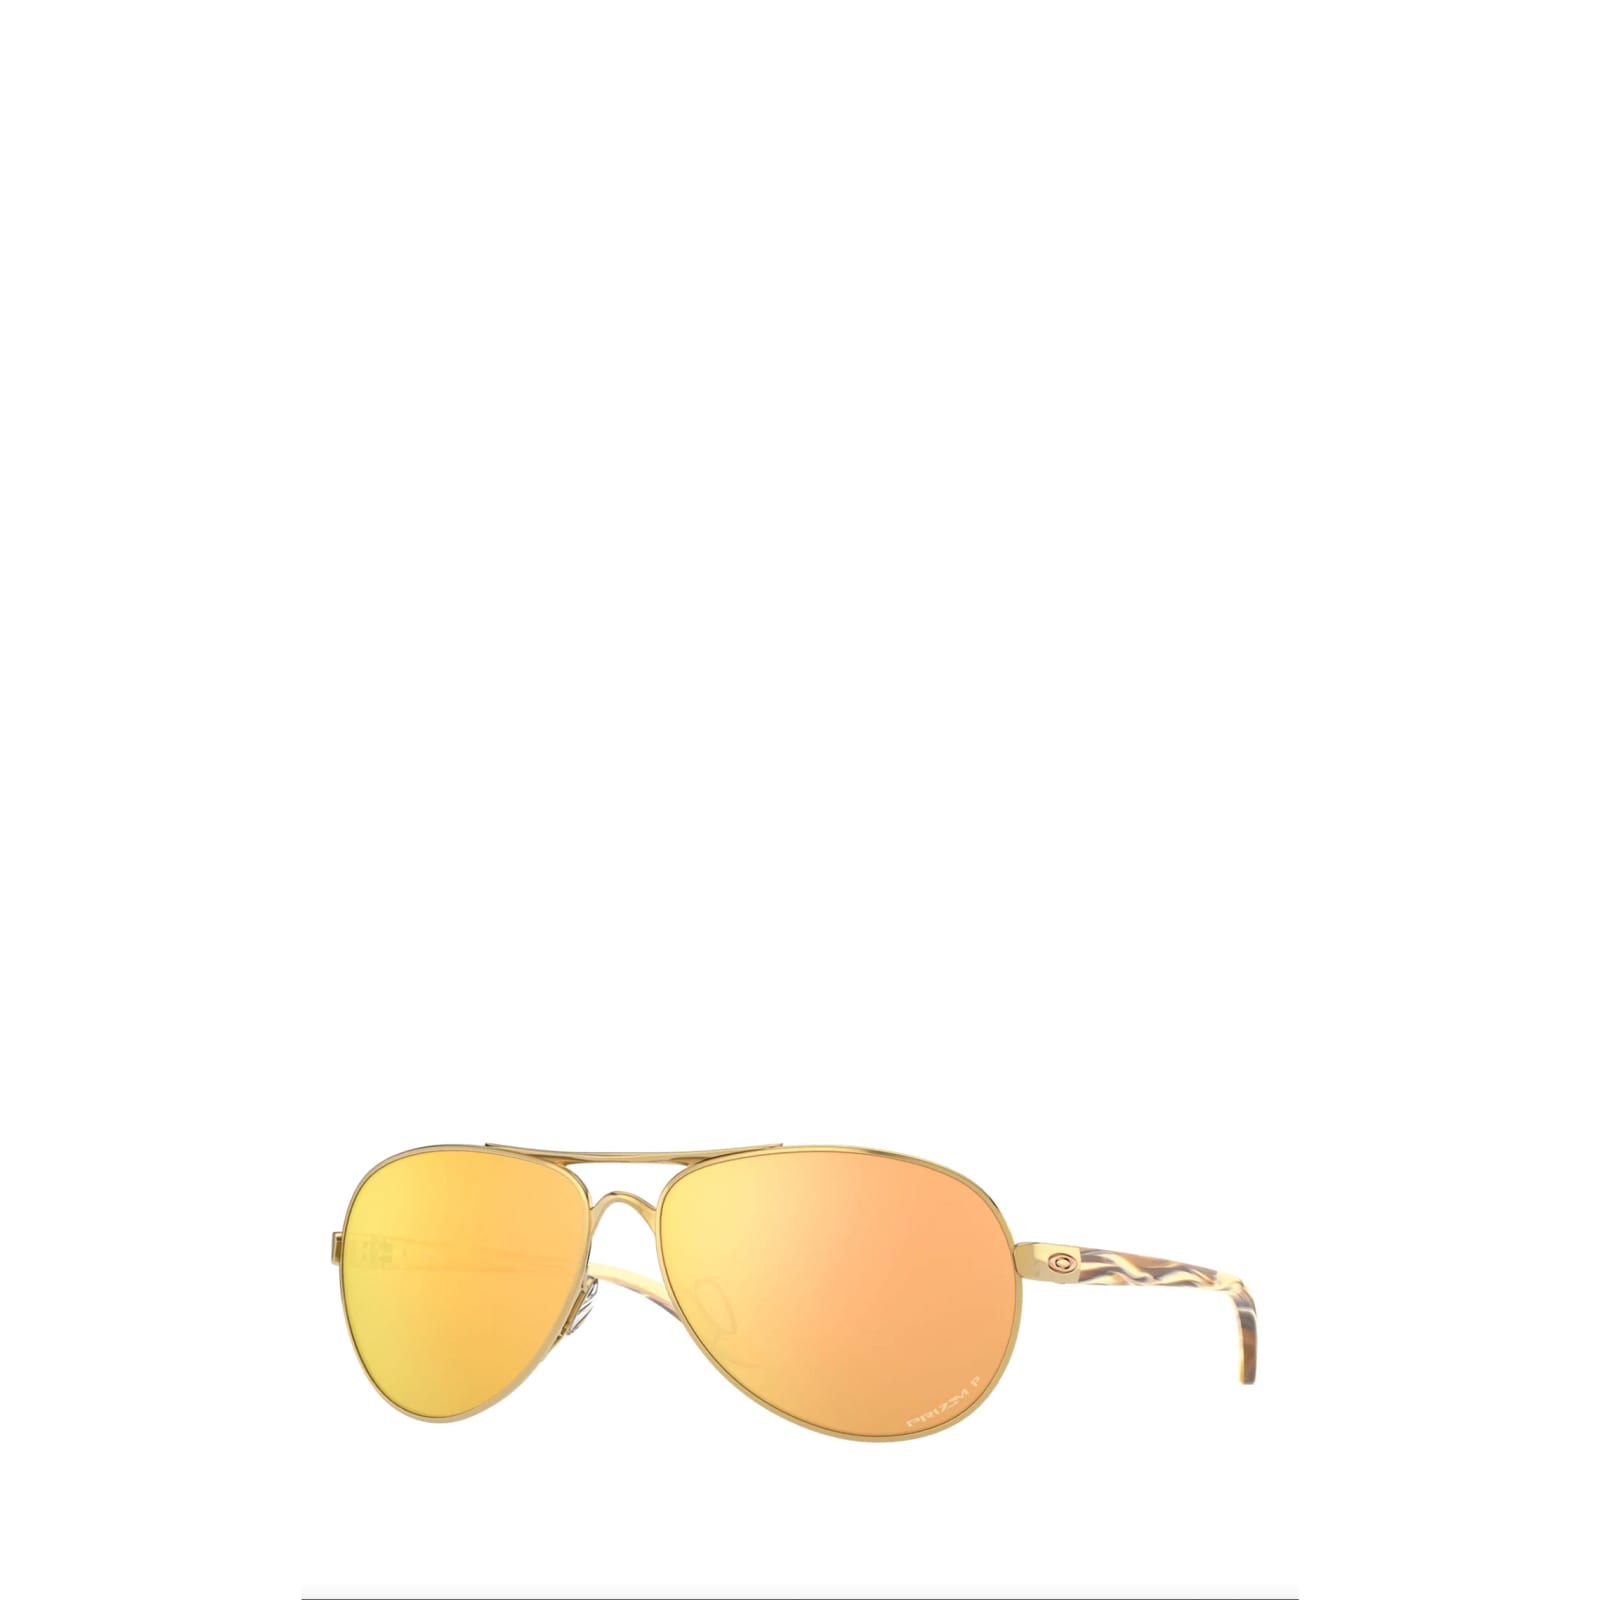 Oakley Feedback Gold with Prizm Rose Gold Polarized Lenses Sunglasses